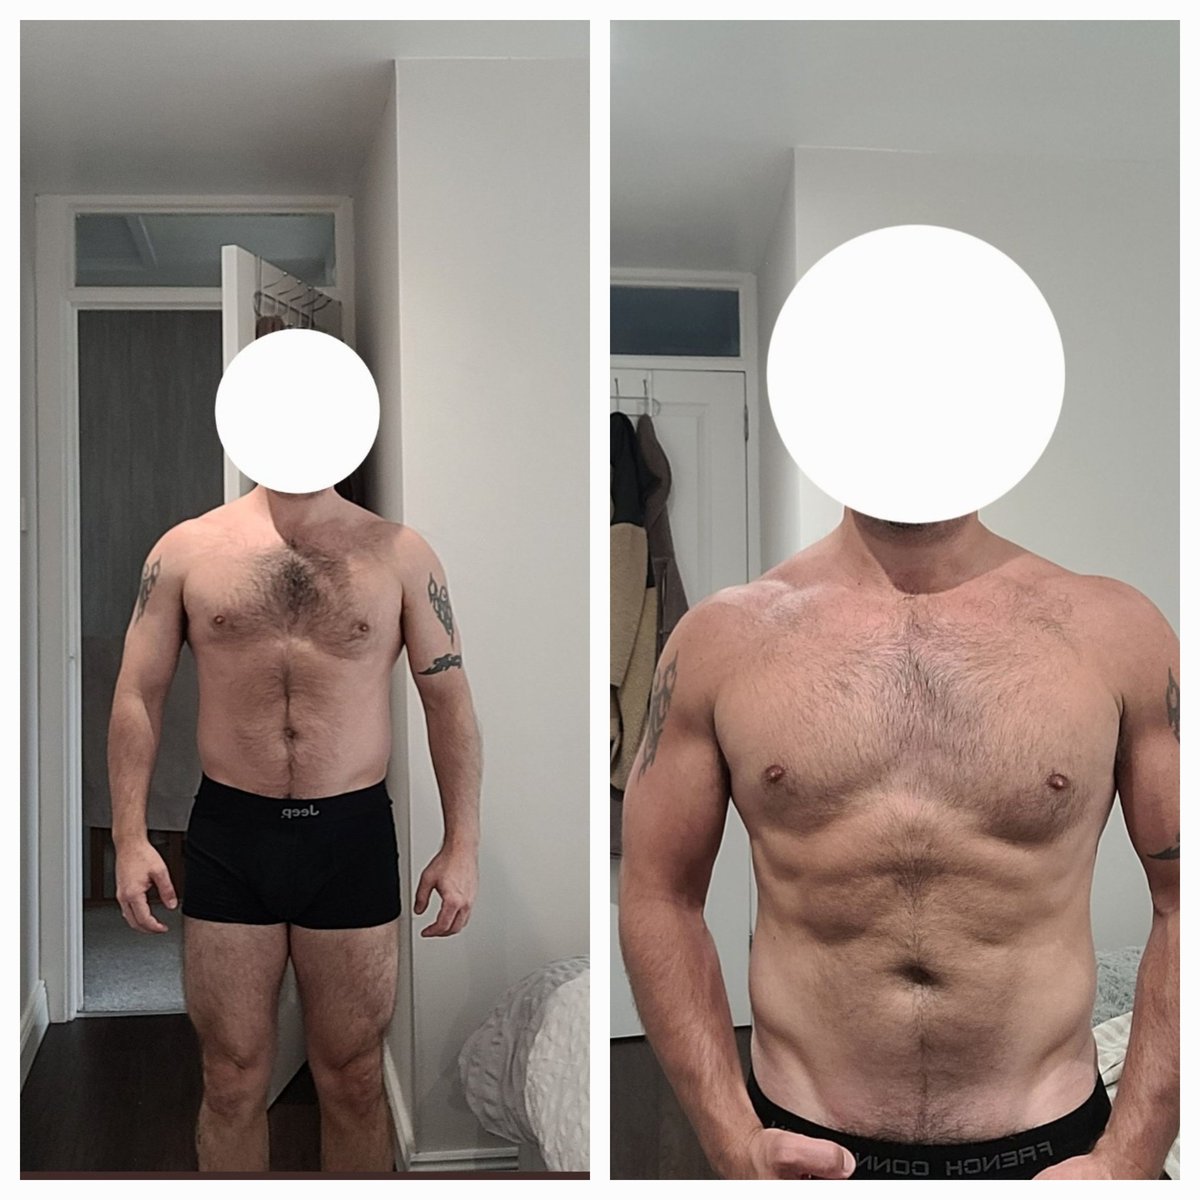 Client before & after...kind of...

Kind of...because we're just over a month into working together.

Nearly finished Phase 1 of my system. Phase 2 starting soon.

He's doing great and most importantly he is inspiring his kids with their fitness too. 💪

#YouCanDoItToo